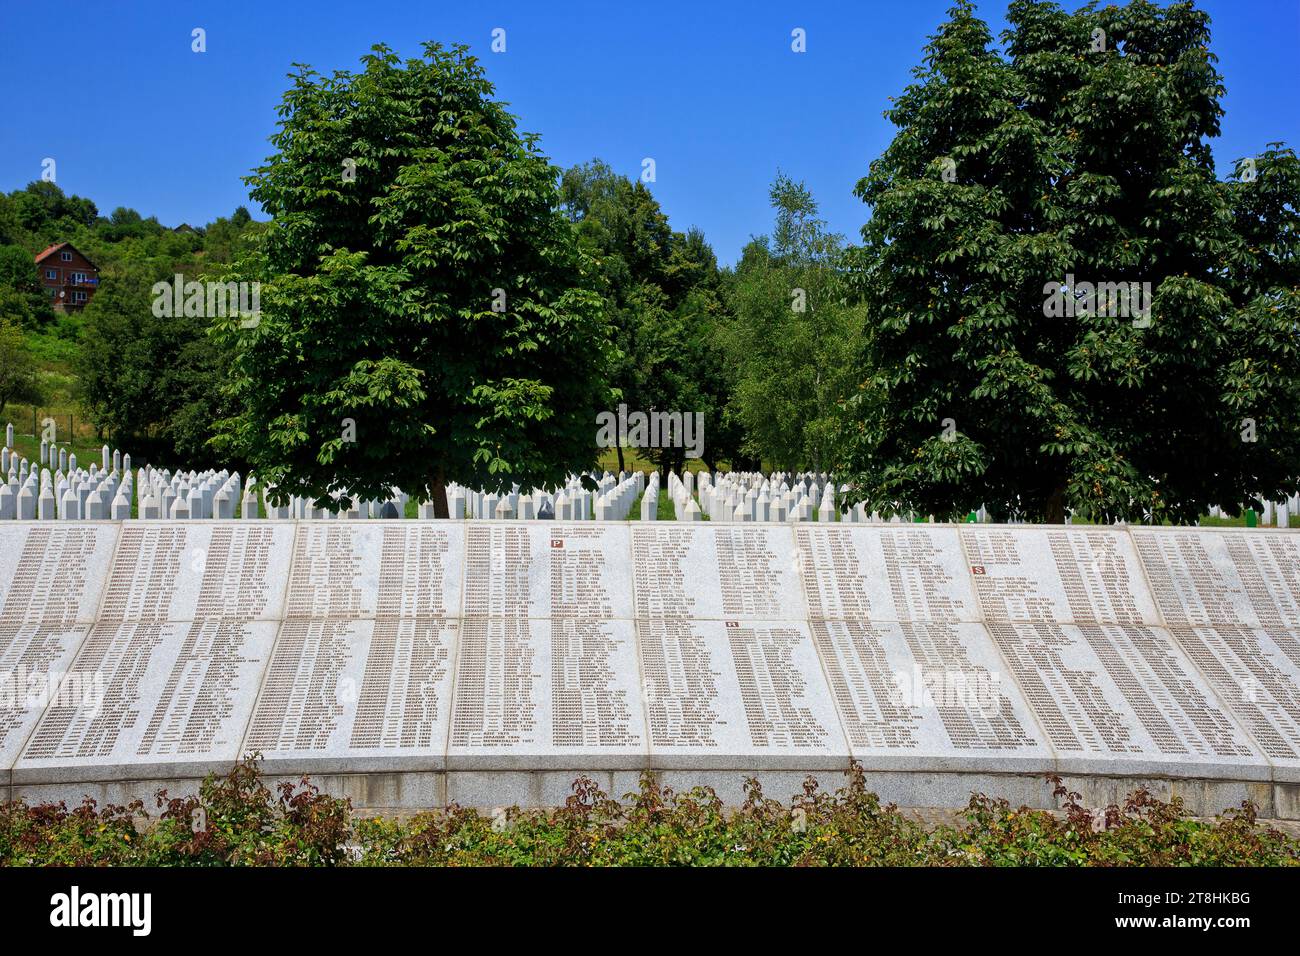 List with the names of the muslim victims at the Srebrenica Genocide Memorial (1995) at Potocari, Bosnia and Herzegovina Stock Photo